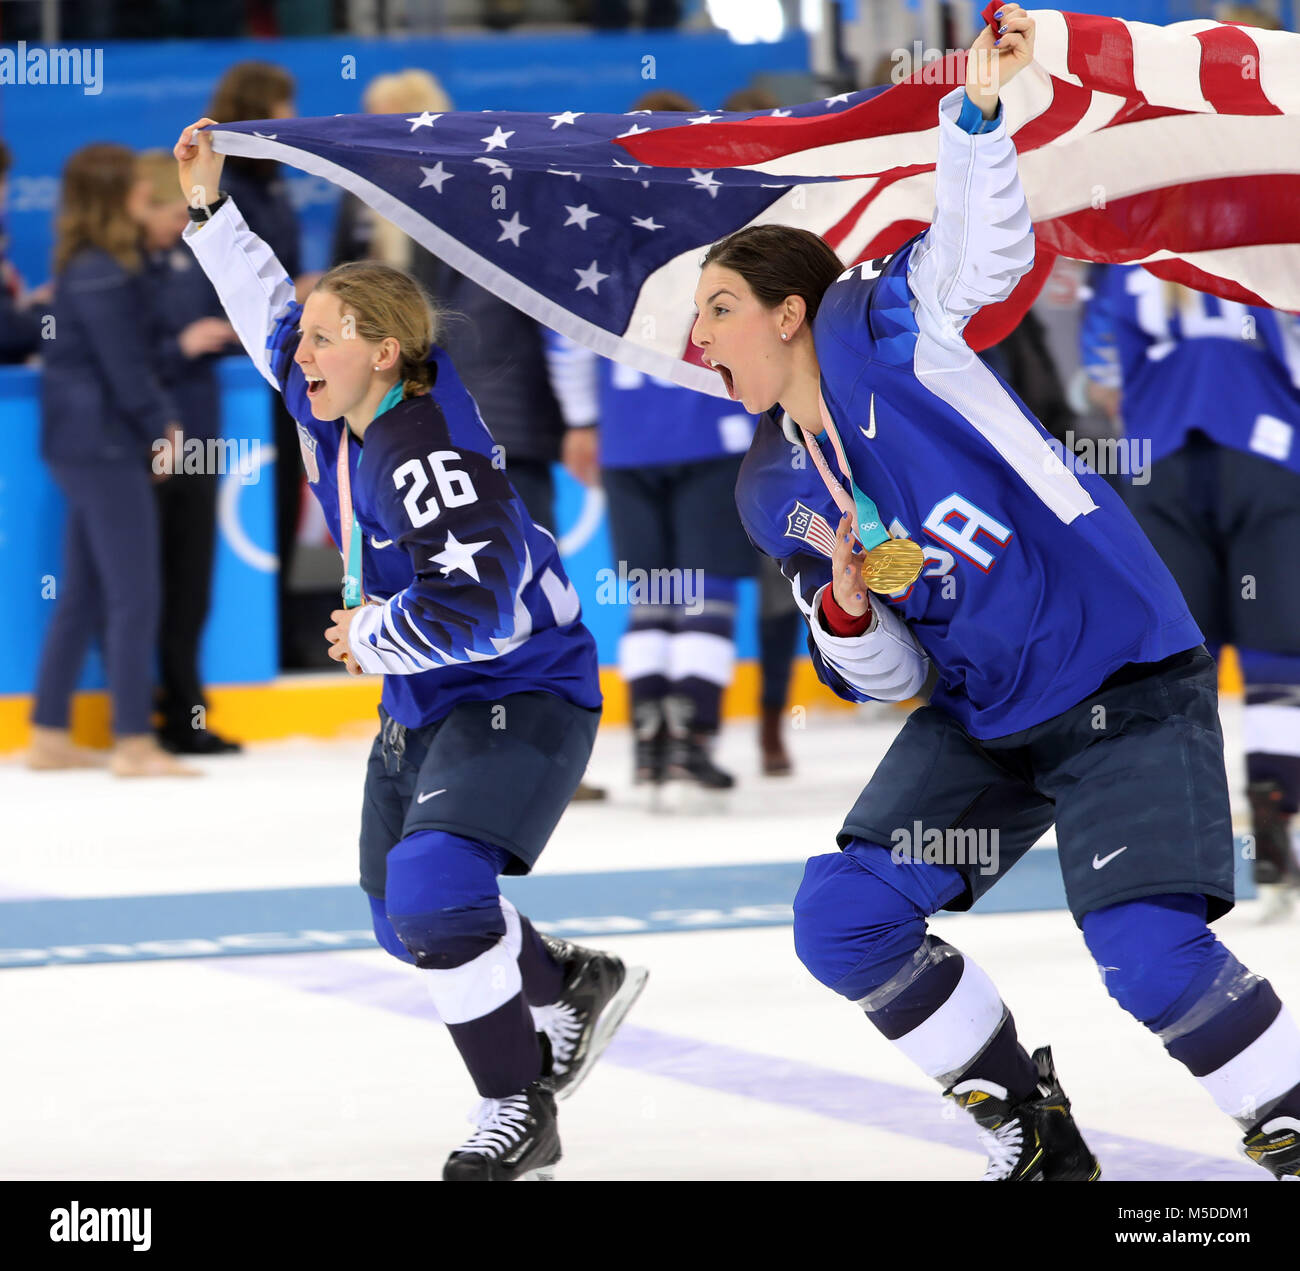 February 22, 2018 - Gangneung, South Korea - KENDALL COYNE and her partner  MICHAEL SCHOFIELD celebrate with the USA team after winning the Ice Hockey:  Women's Gold Medal Game against Canada at